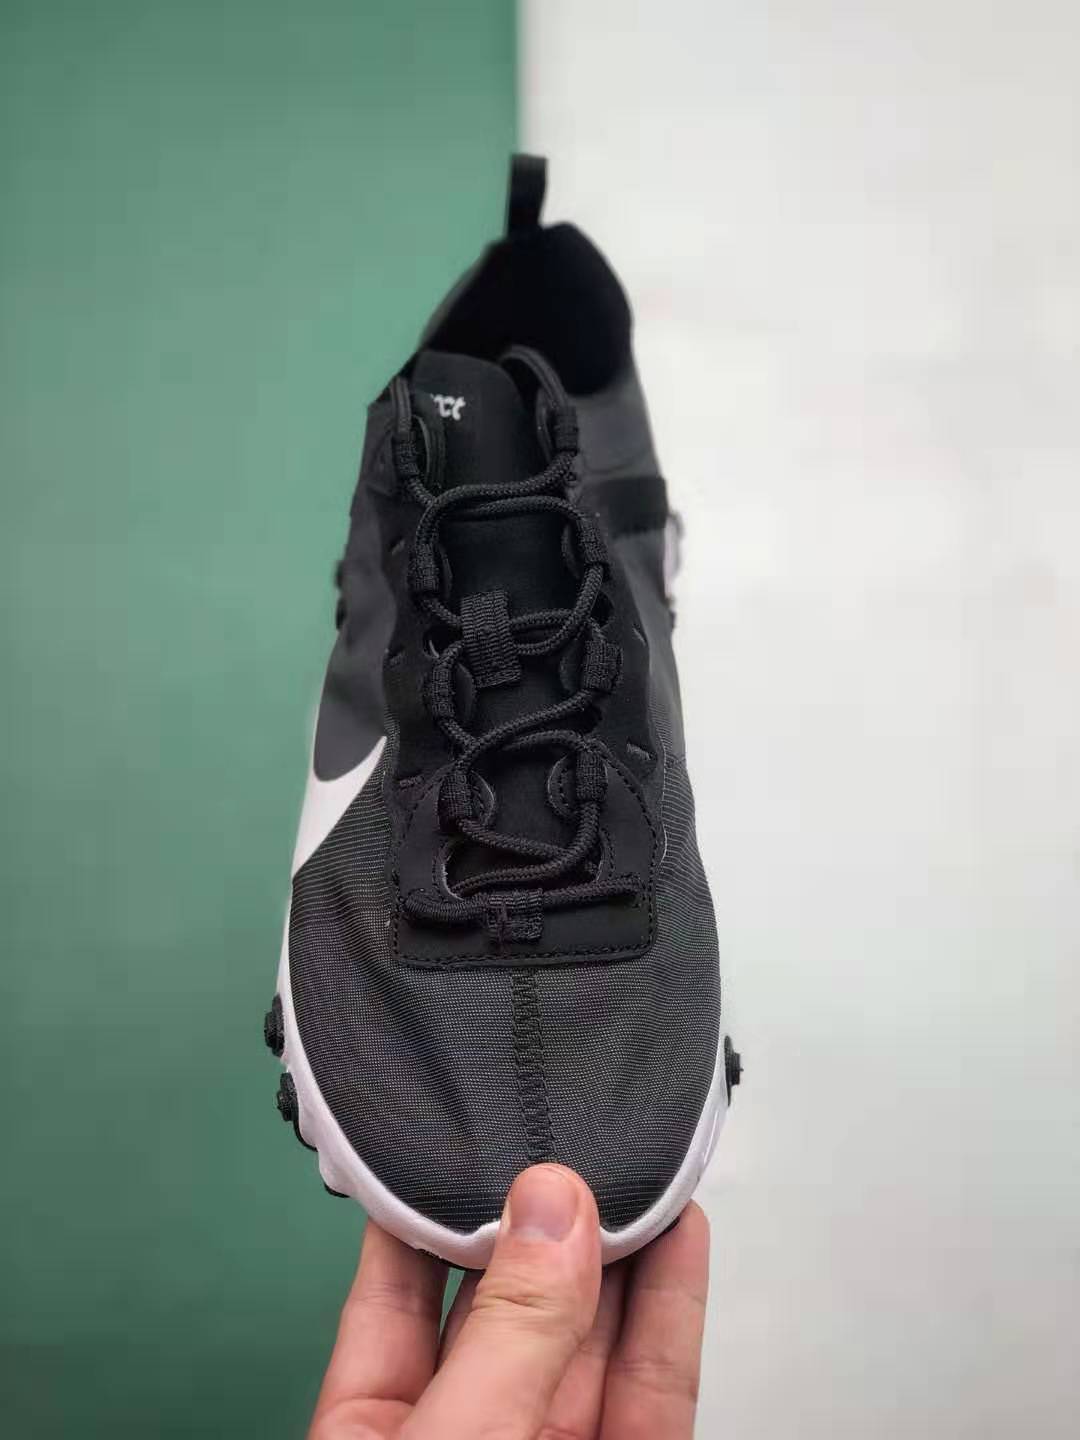 Nike React Element 55 'Black White' BQ6166-003 - Stylish and Versatile Sneakers | Limited Stock Available